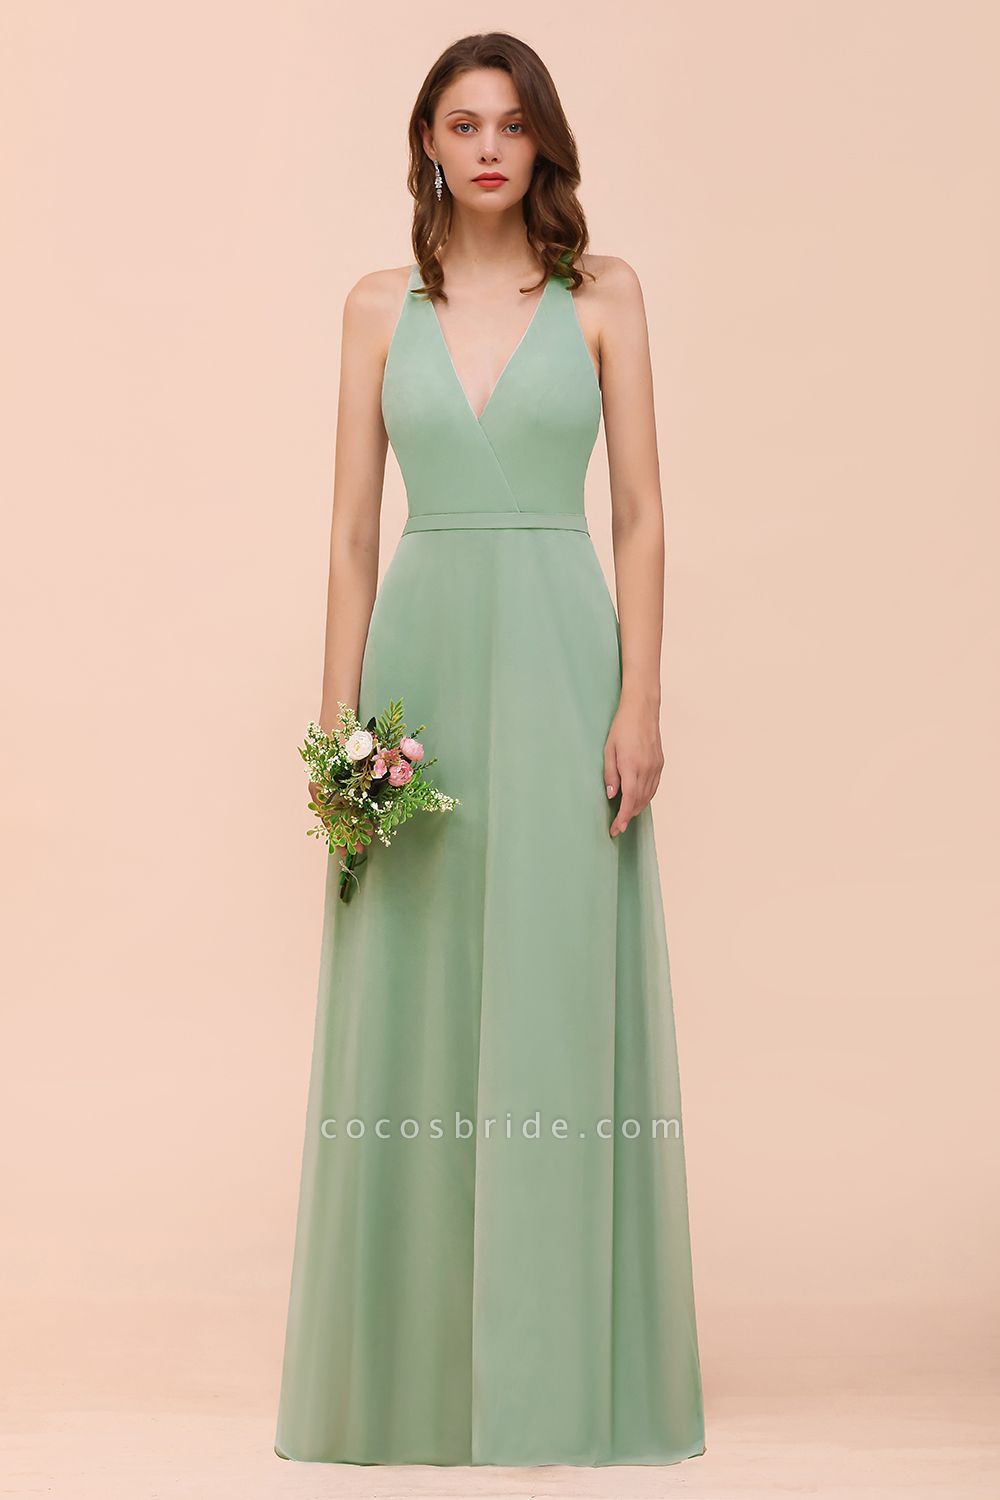 Simple V-neck Wide Straps A-line Chiffon Bridesmaid Dress With Pockets